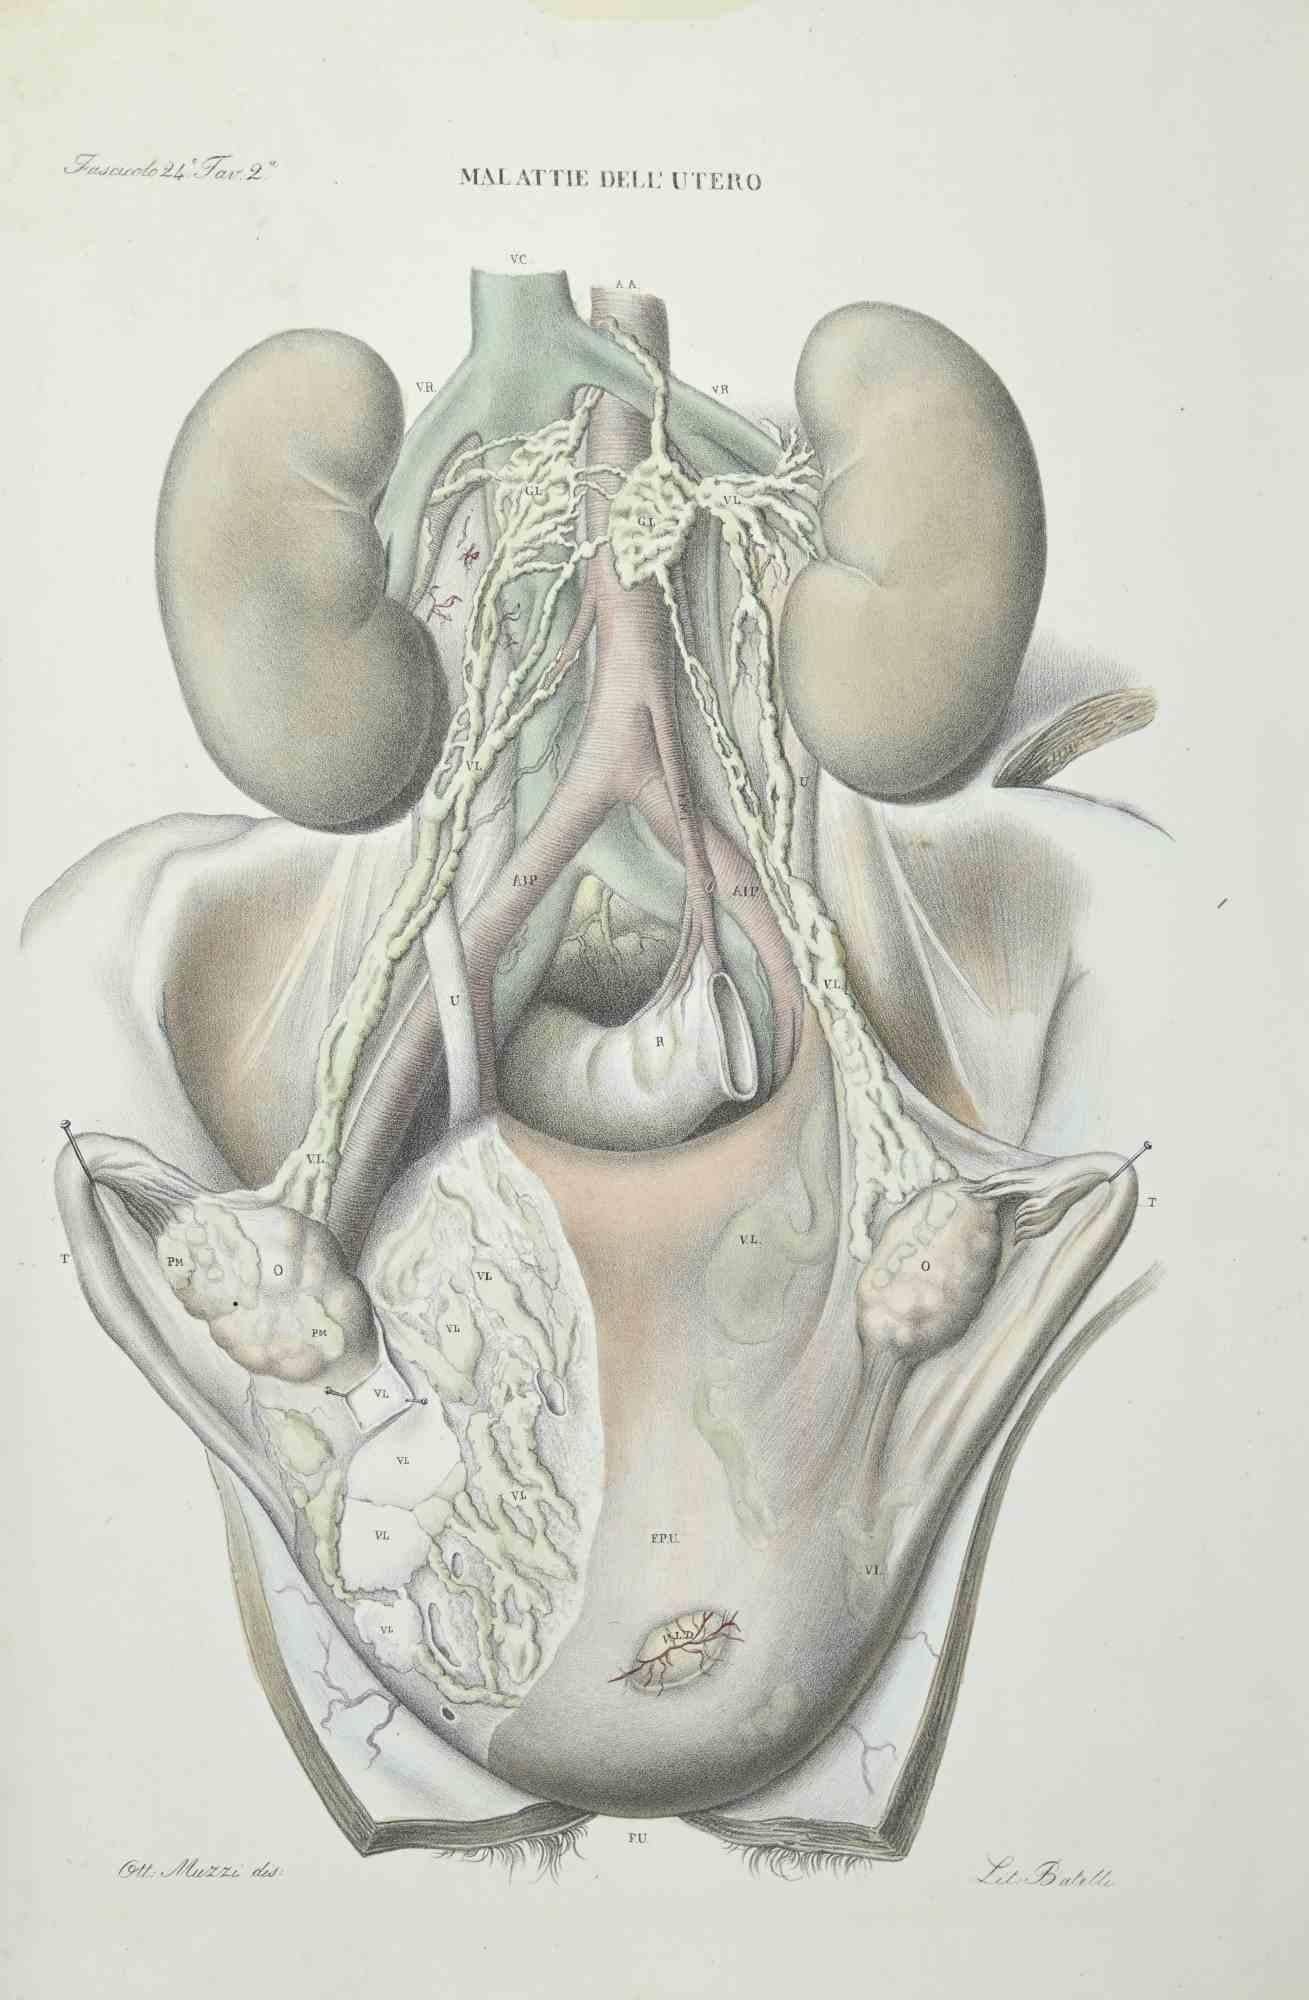 Uterus Diseases is a lithograph hand colored by Ottavio Muzzi for the edition of Antoine Chazal,Human Anatomy, Printers Batelli and Ridolfi, realized in 1843.
Signed on plate on the lower left margin. 

The artwork belongs to the "Atlante Generale